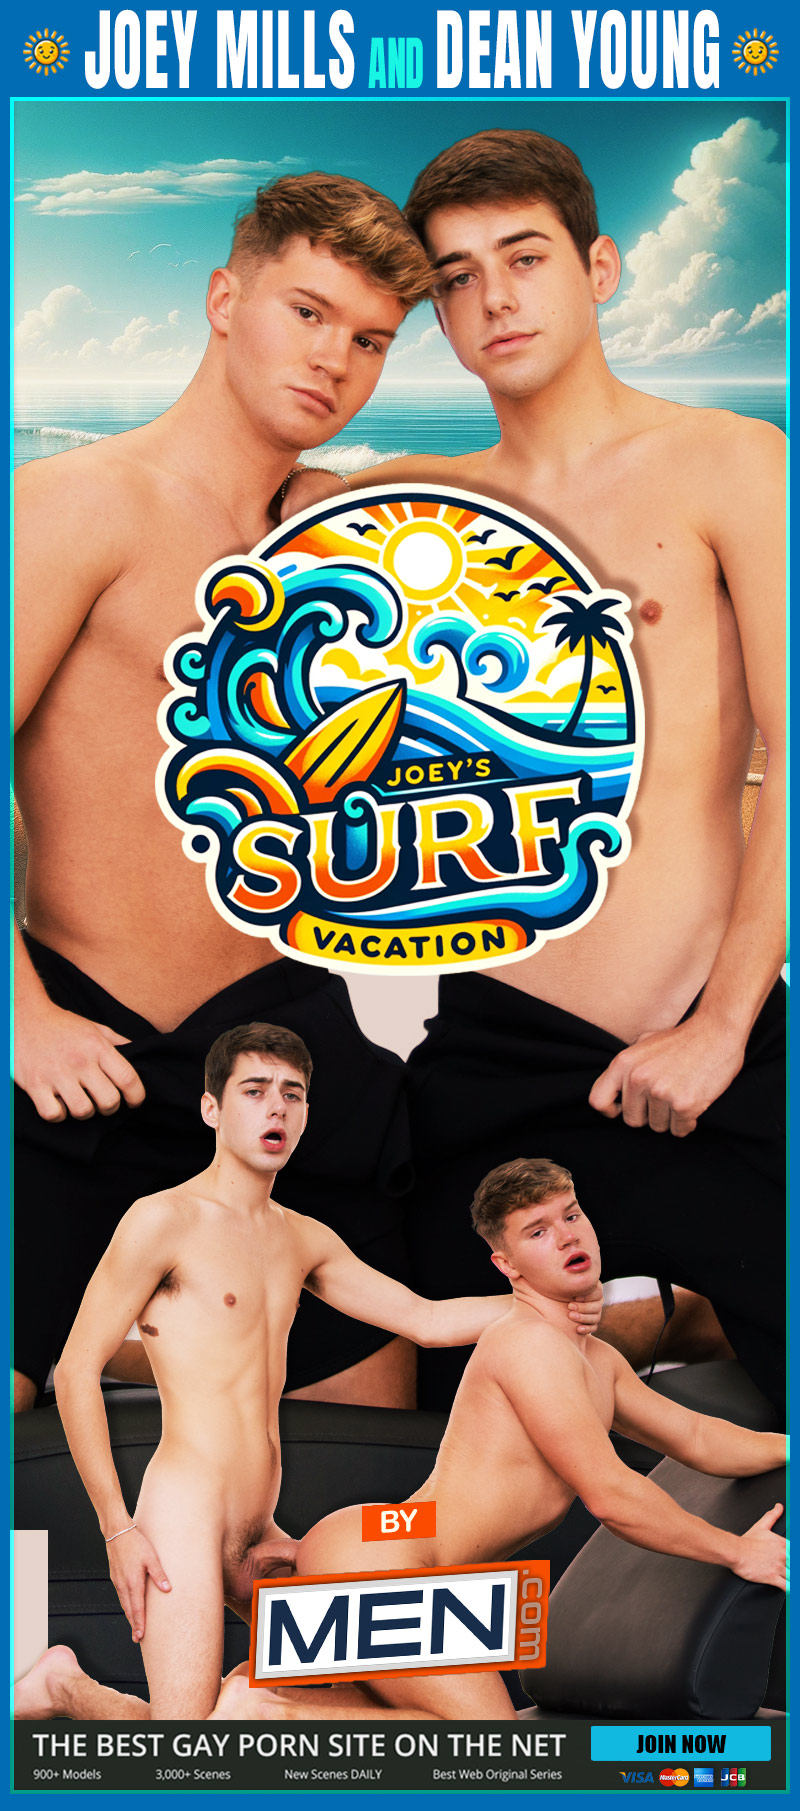 Joey's Surf Vacation, Part 2 (Dean Young and Joey Mills Flip-Fuck) at MEN.com